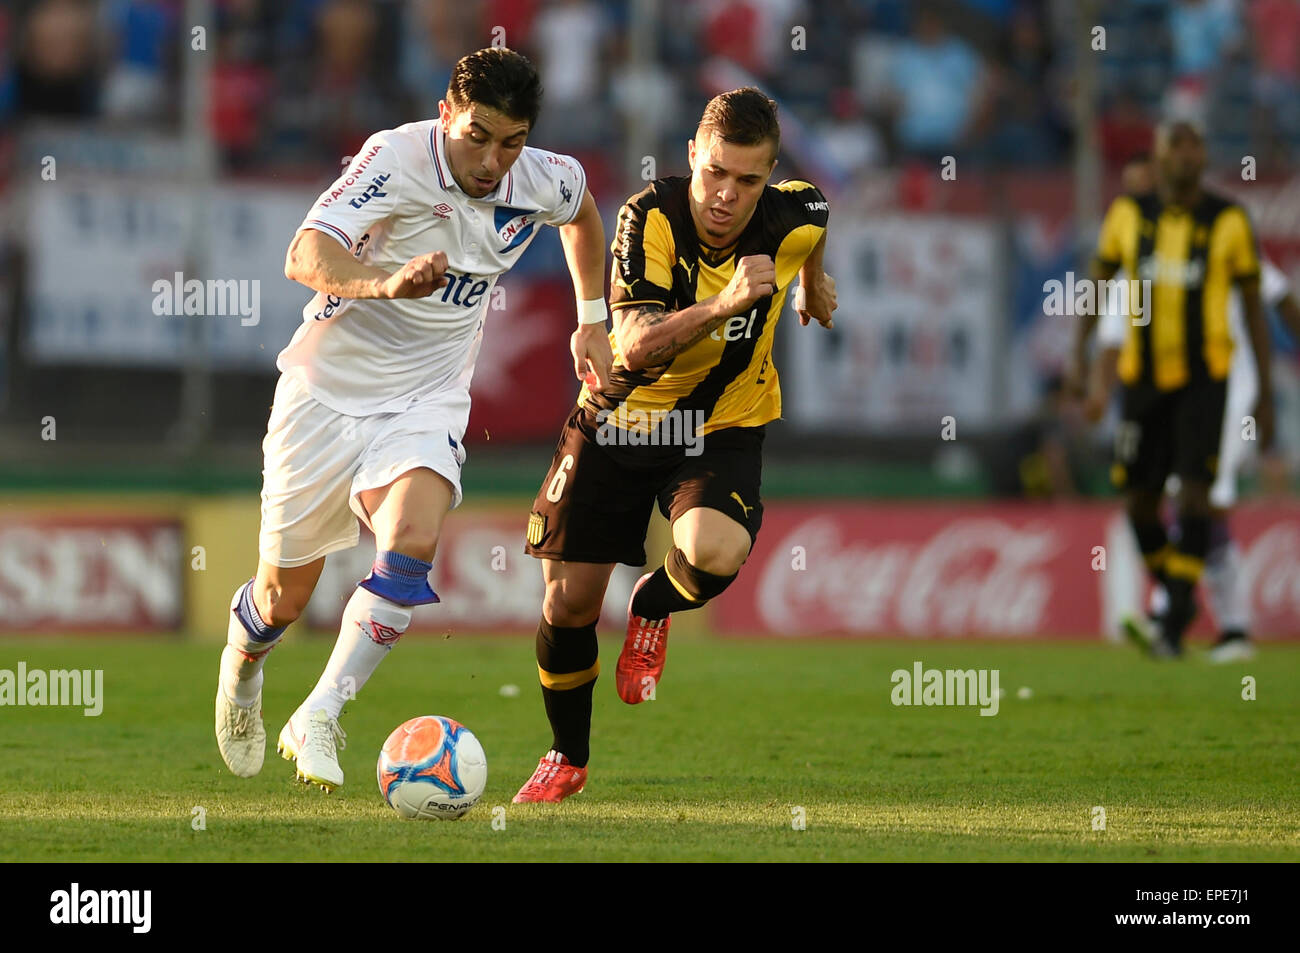 Montevideo, Uruguay. 17th May, 2015. Penarol's Diogo Silvestre (R) vies with Jorge Fucile of Nacional during a match of the Uruguayan Soccer Championship in Montevideo, capital of Uruguay, on May 17, 2015. Credit:  Nicolas Celaya/Xinhua/Alamy Live News Stock Photo